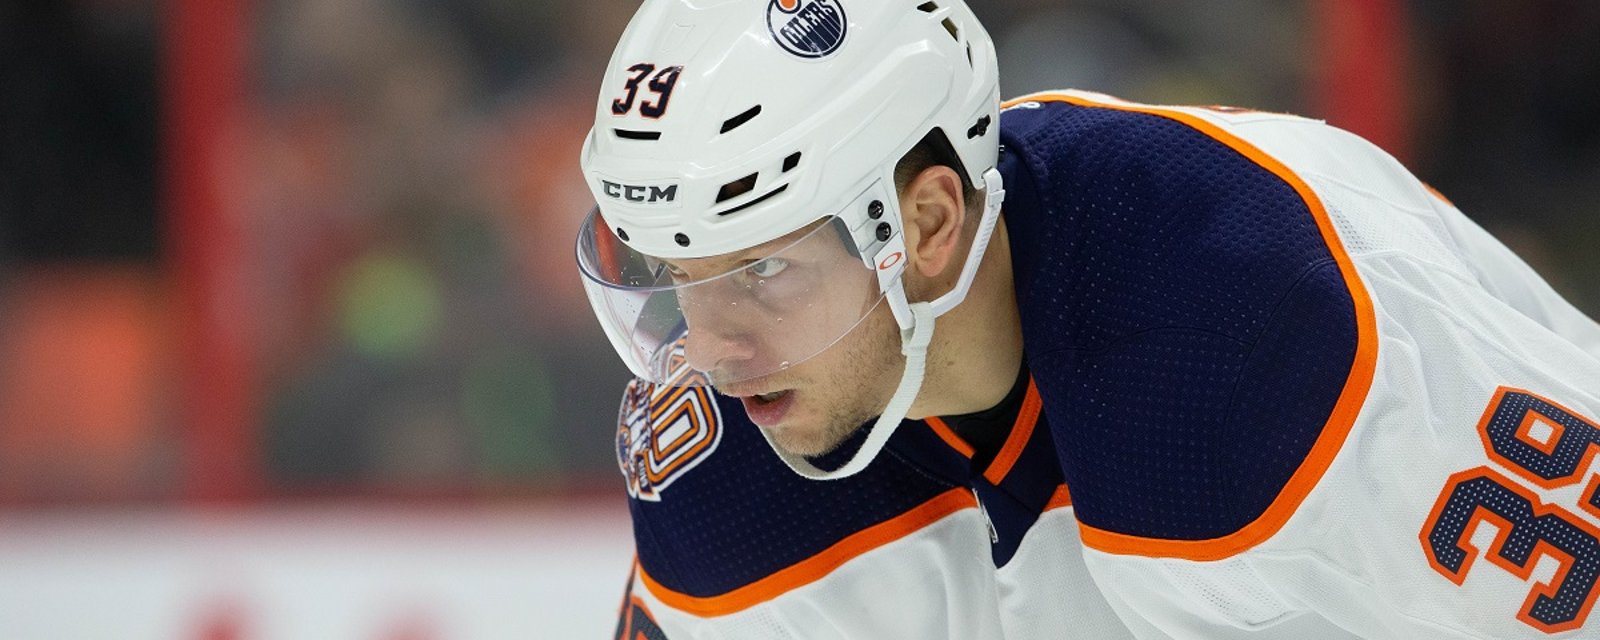 The Oilers have lost 2 players due to illness.